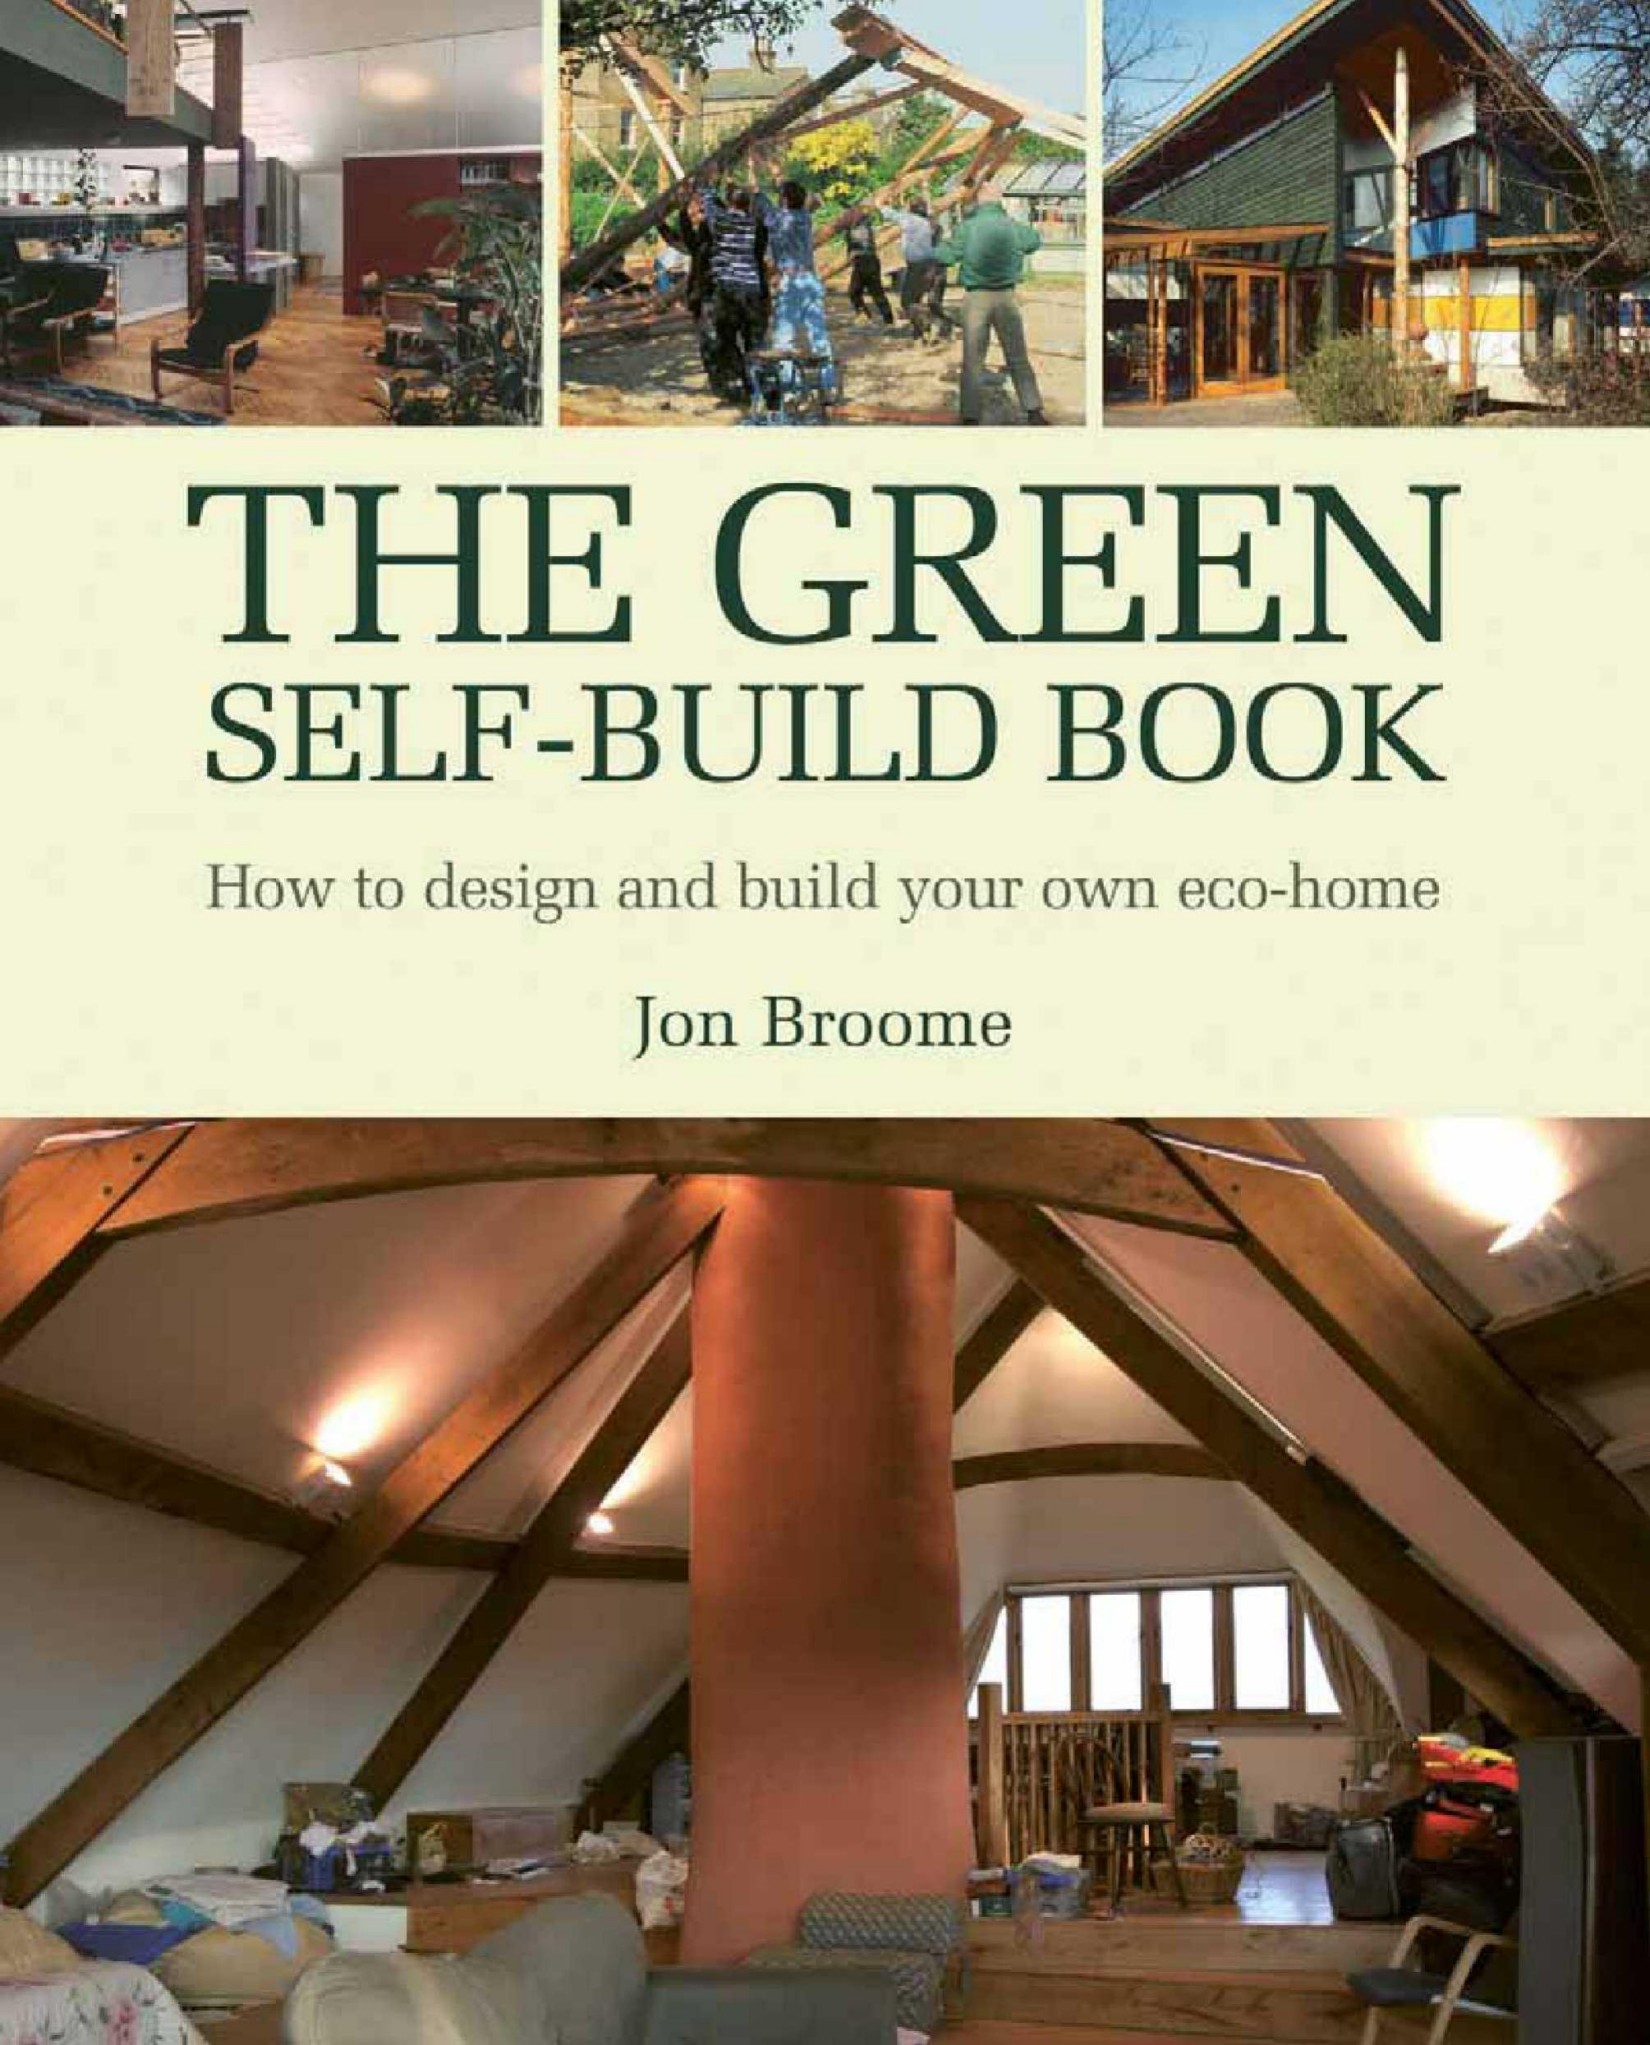 The Green Self-Build Book How to Design and Build Your Own Eco-Home (Sustainable Building) 2007